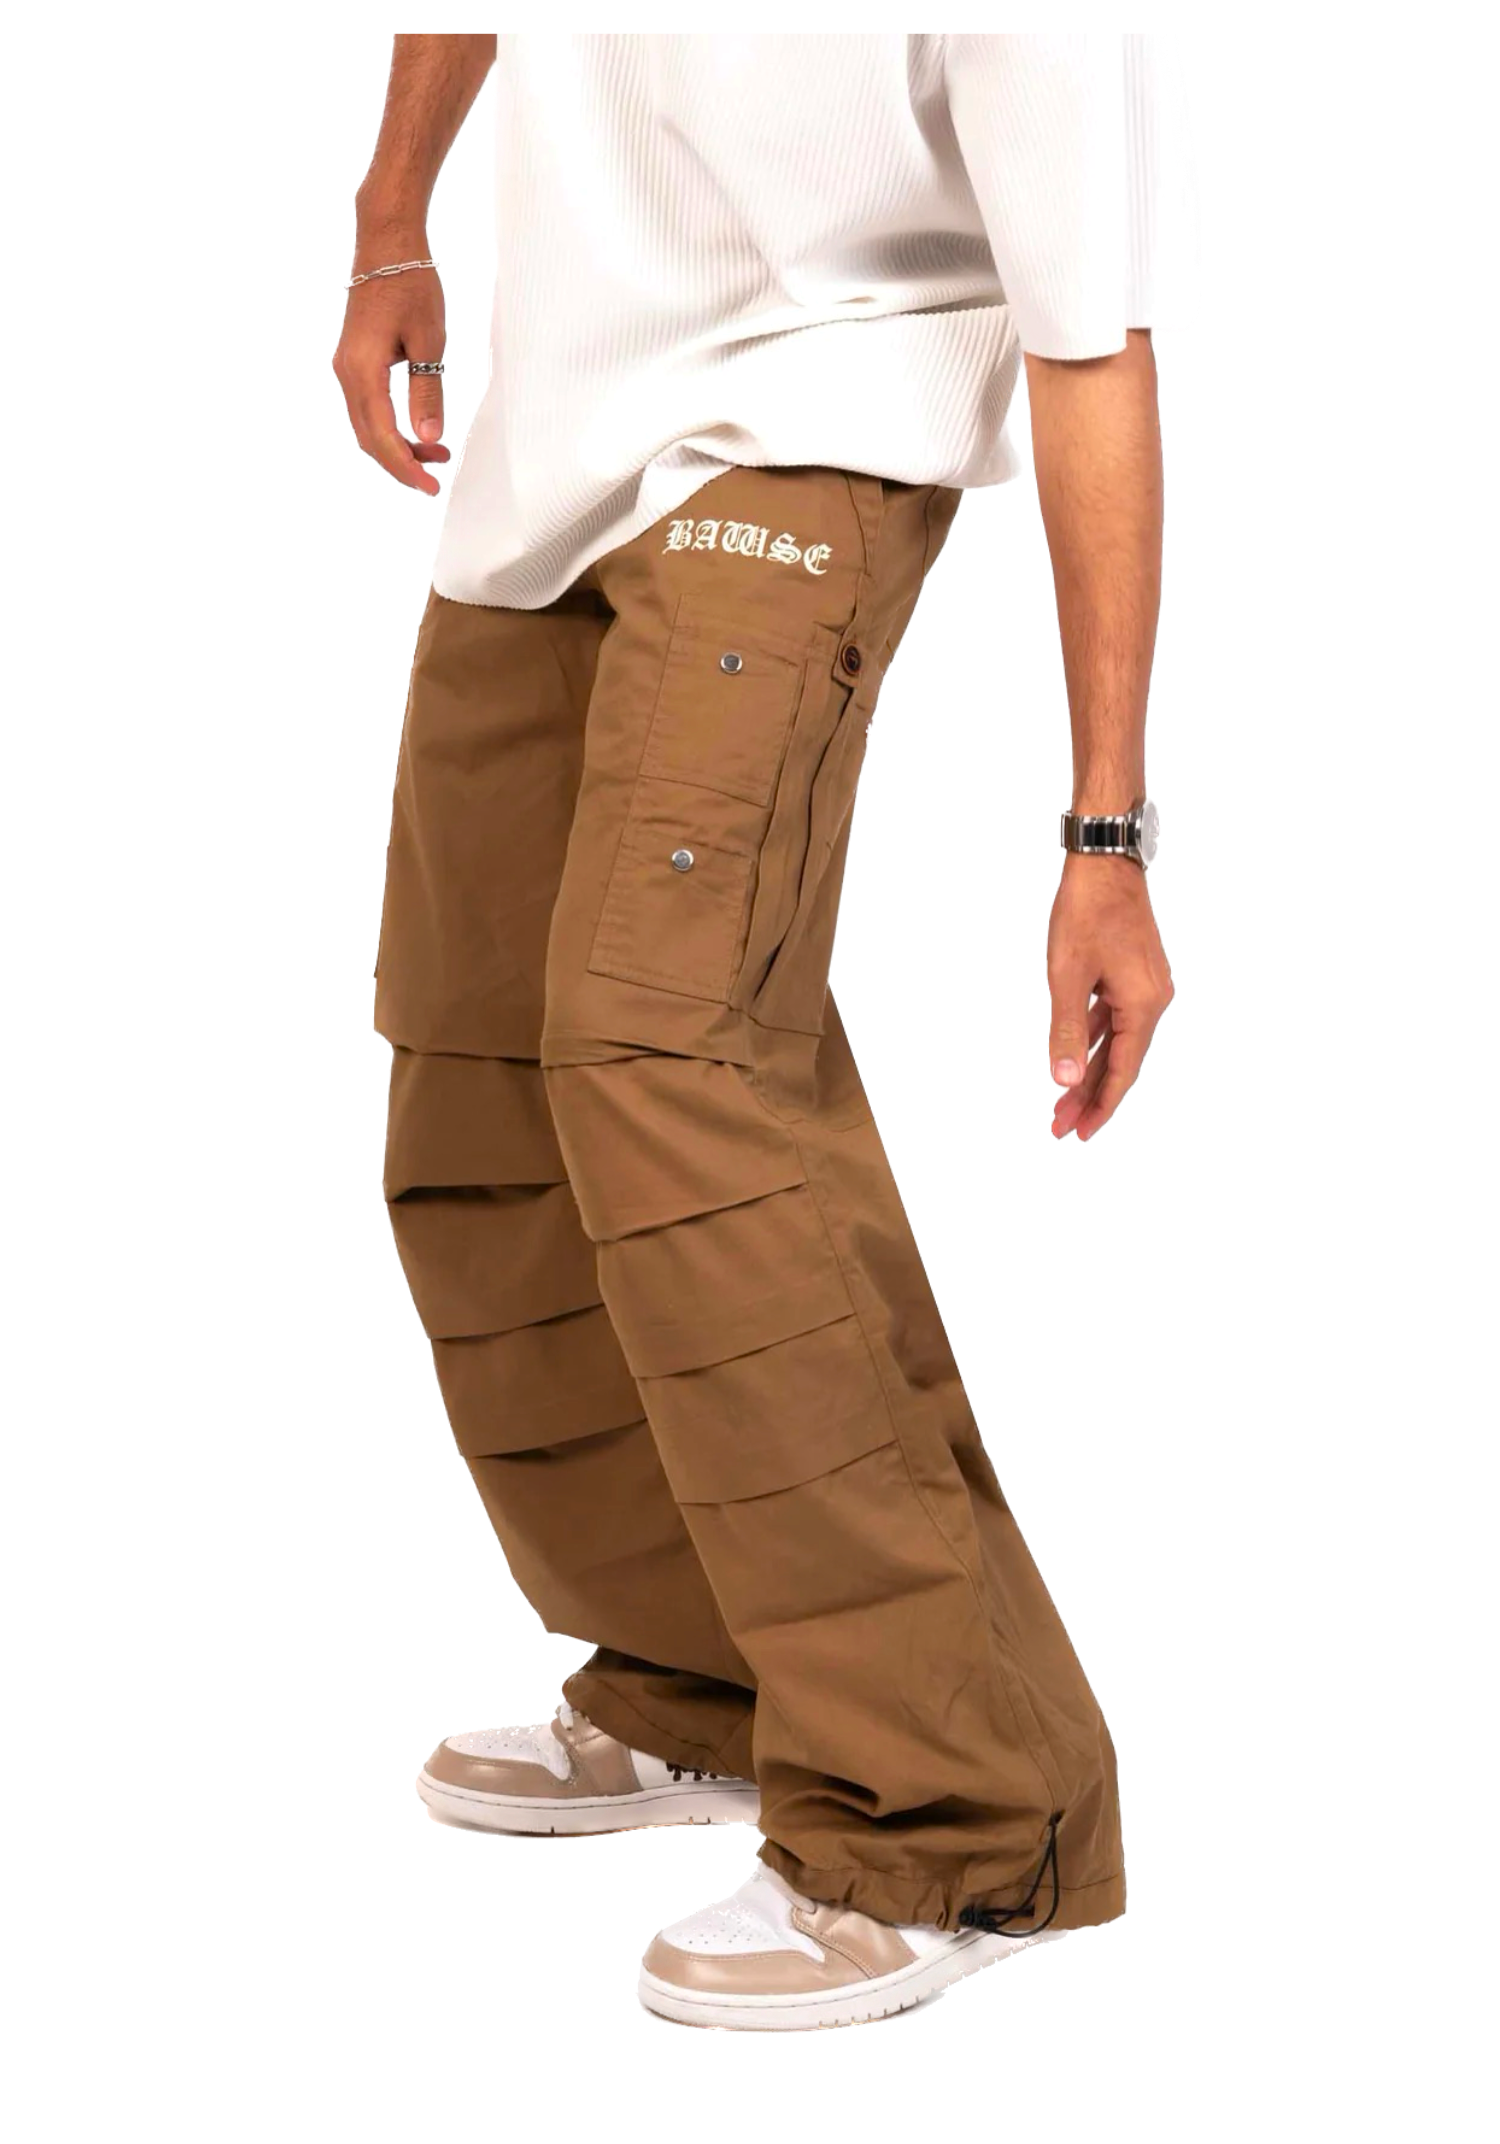 Utility Cargo Pants V6 in Beige | Cargo pants, Mens outfits, Mens work pants